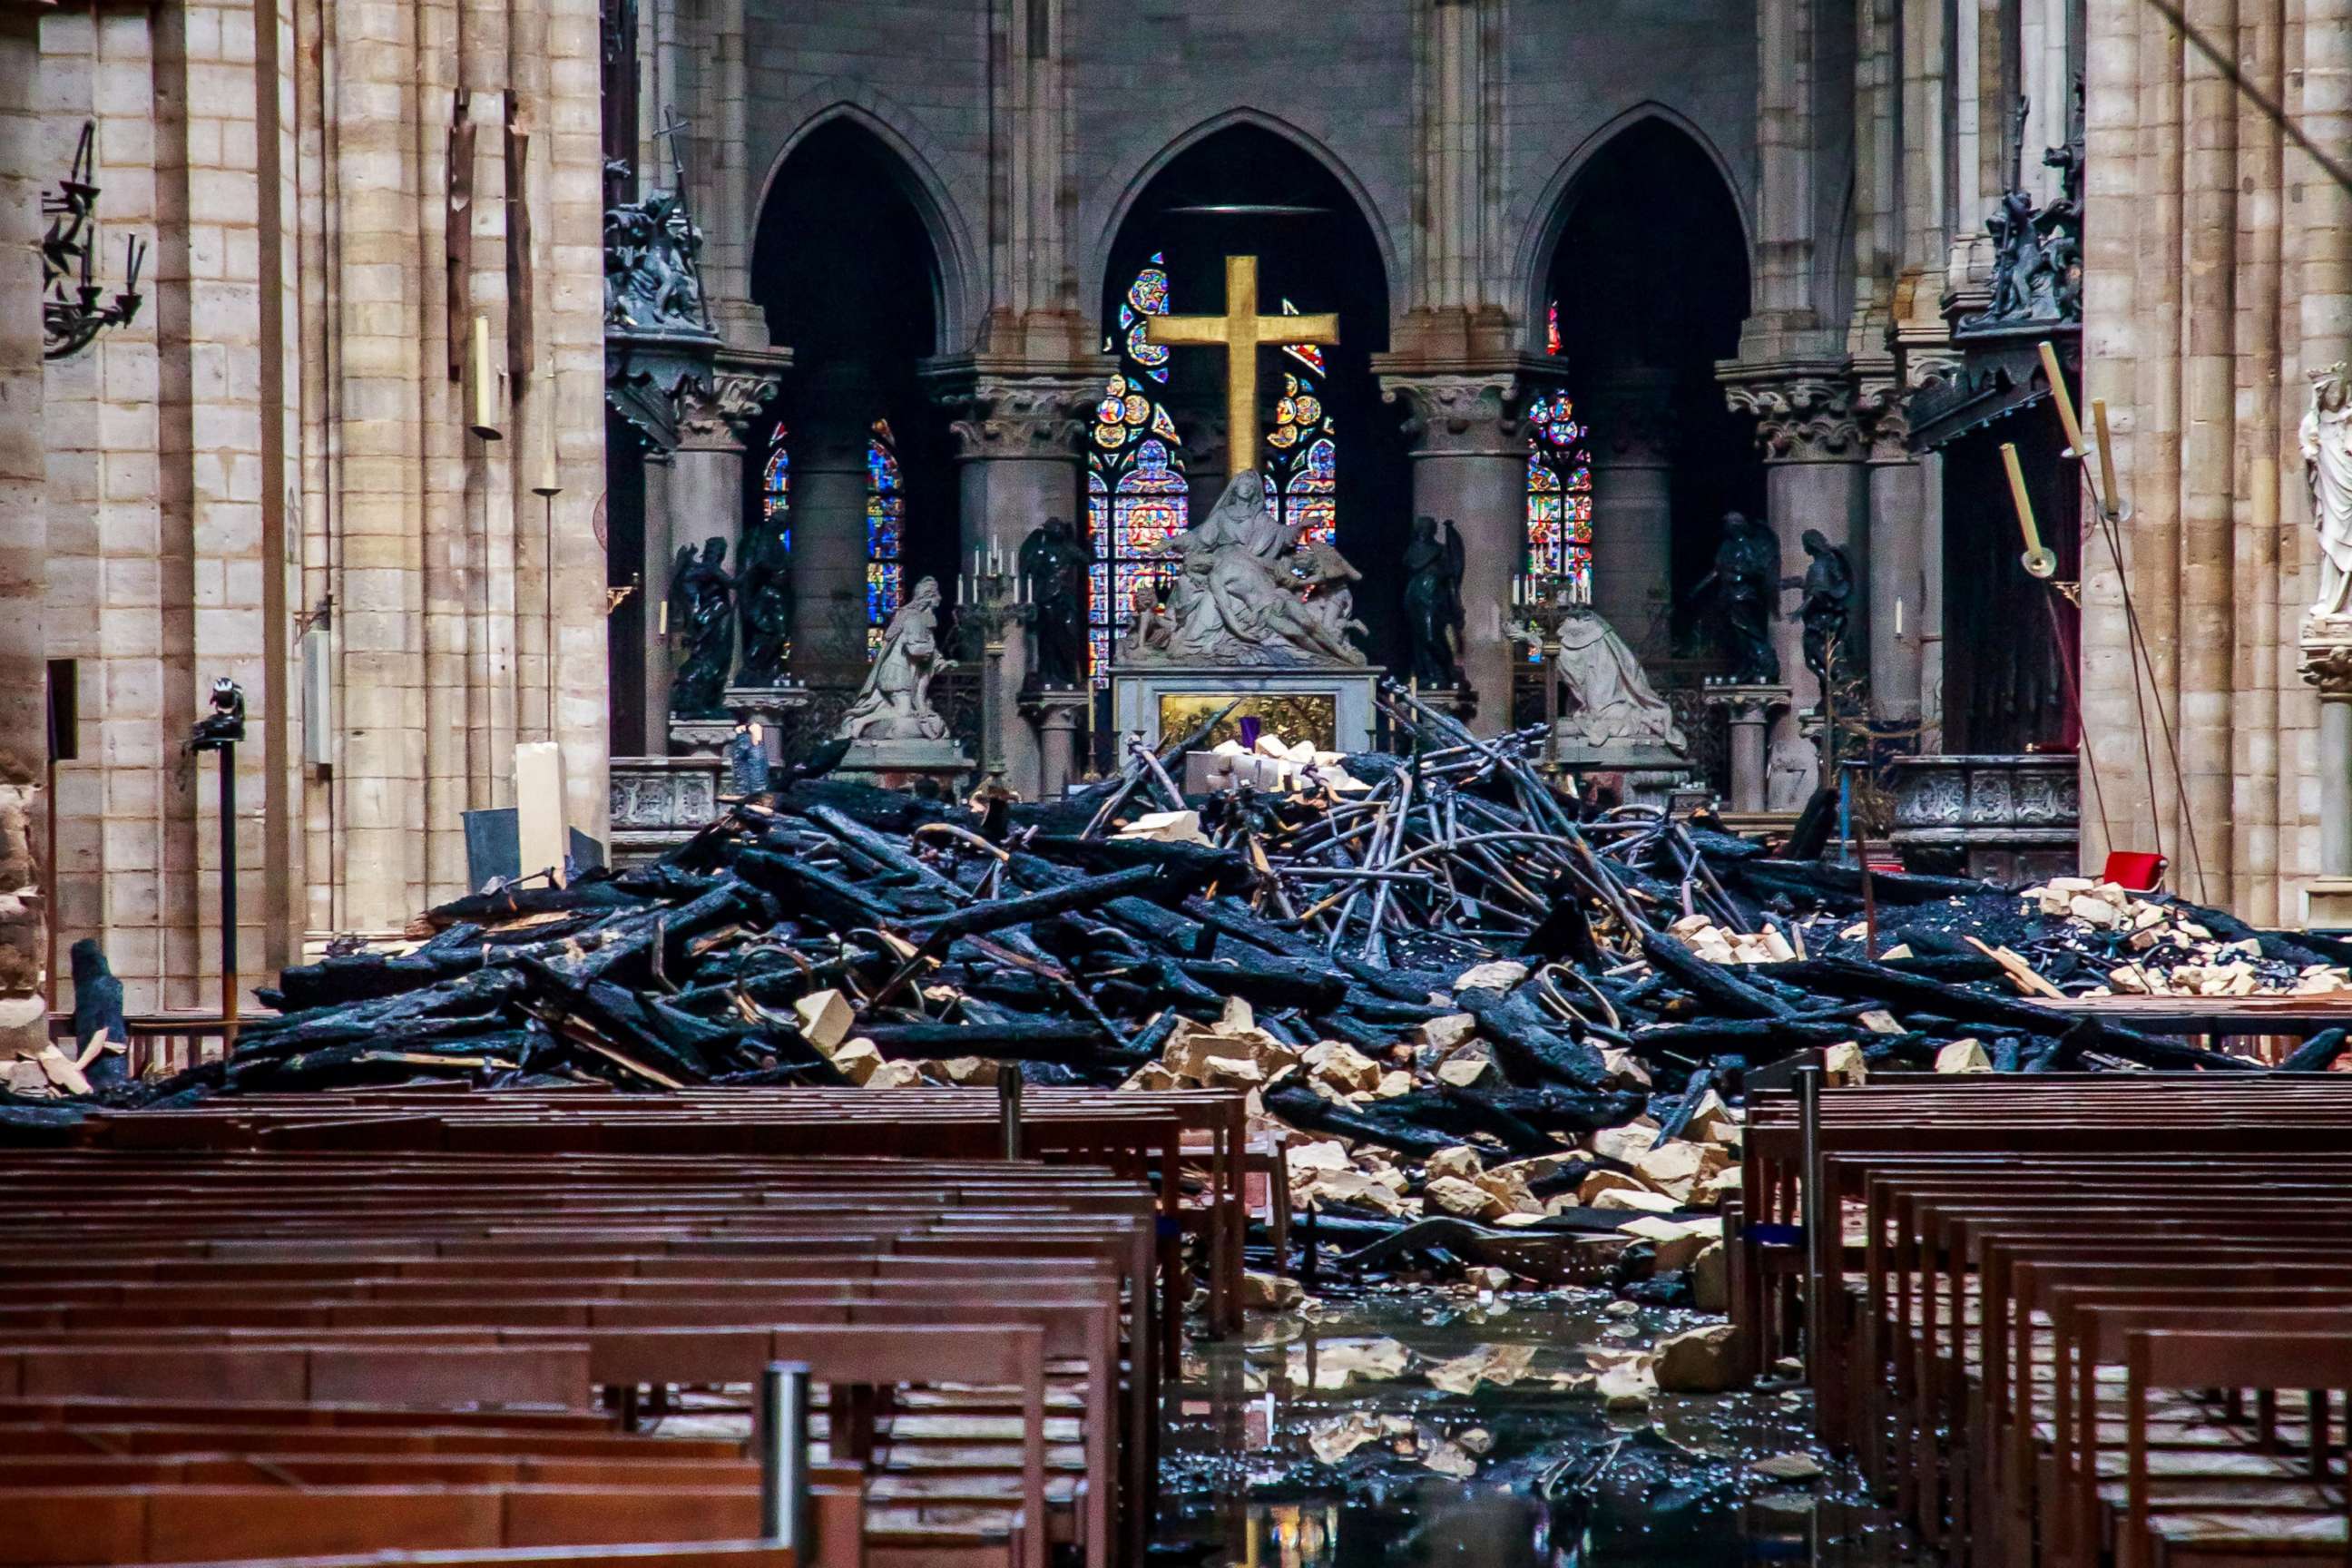 PHOTO: A view of the debris inside Notre-Dame de Paris in the aftermath of a fire that devastated the cathedral in Paris, April 16, 2019.